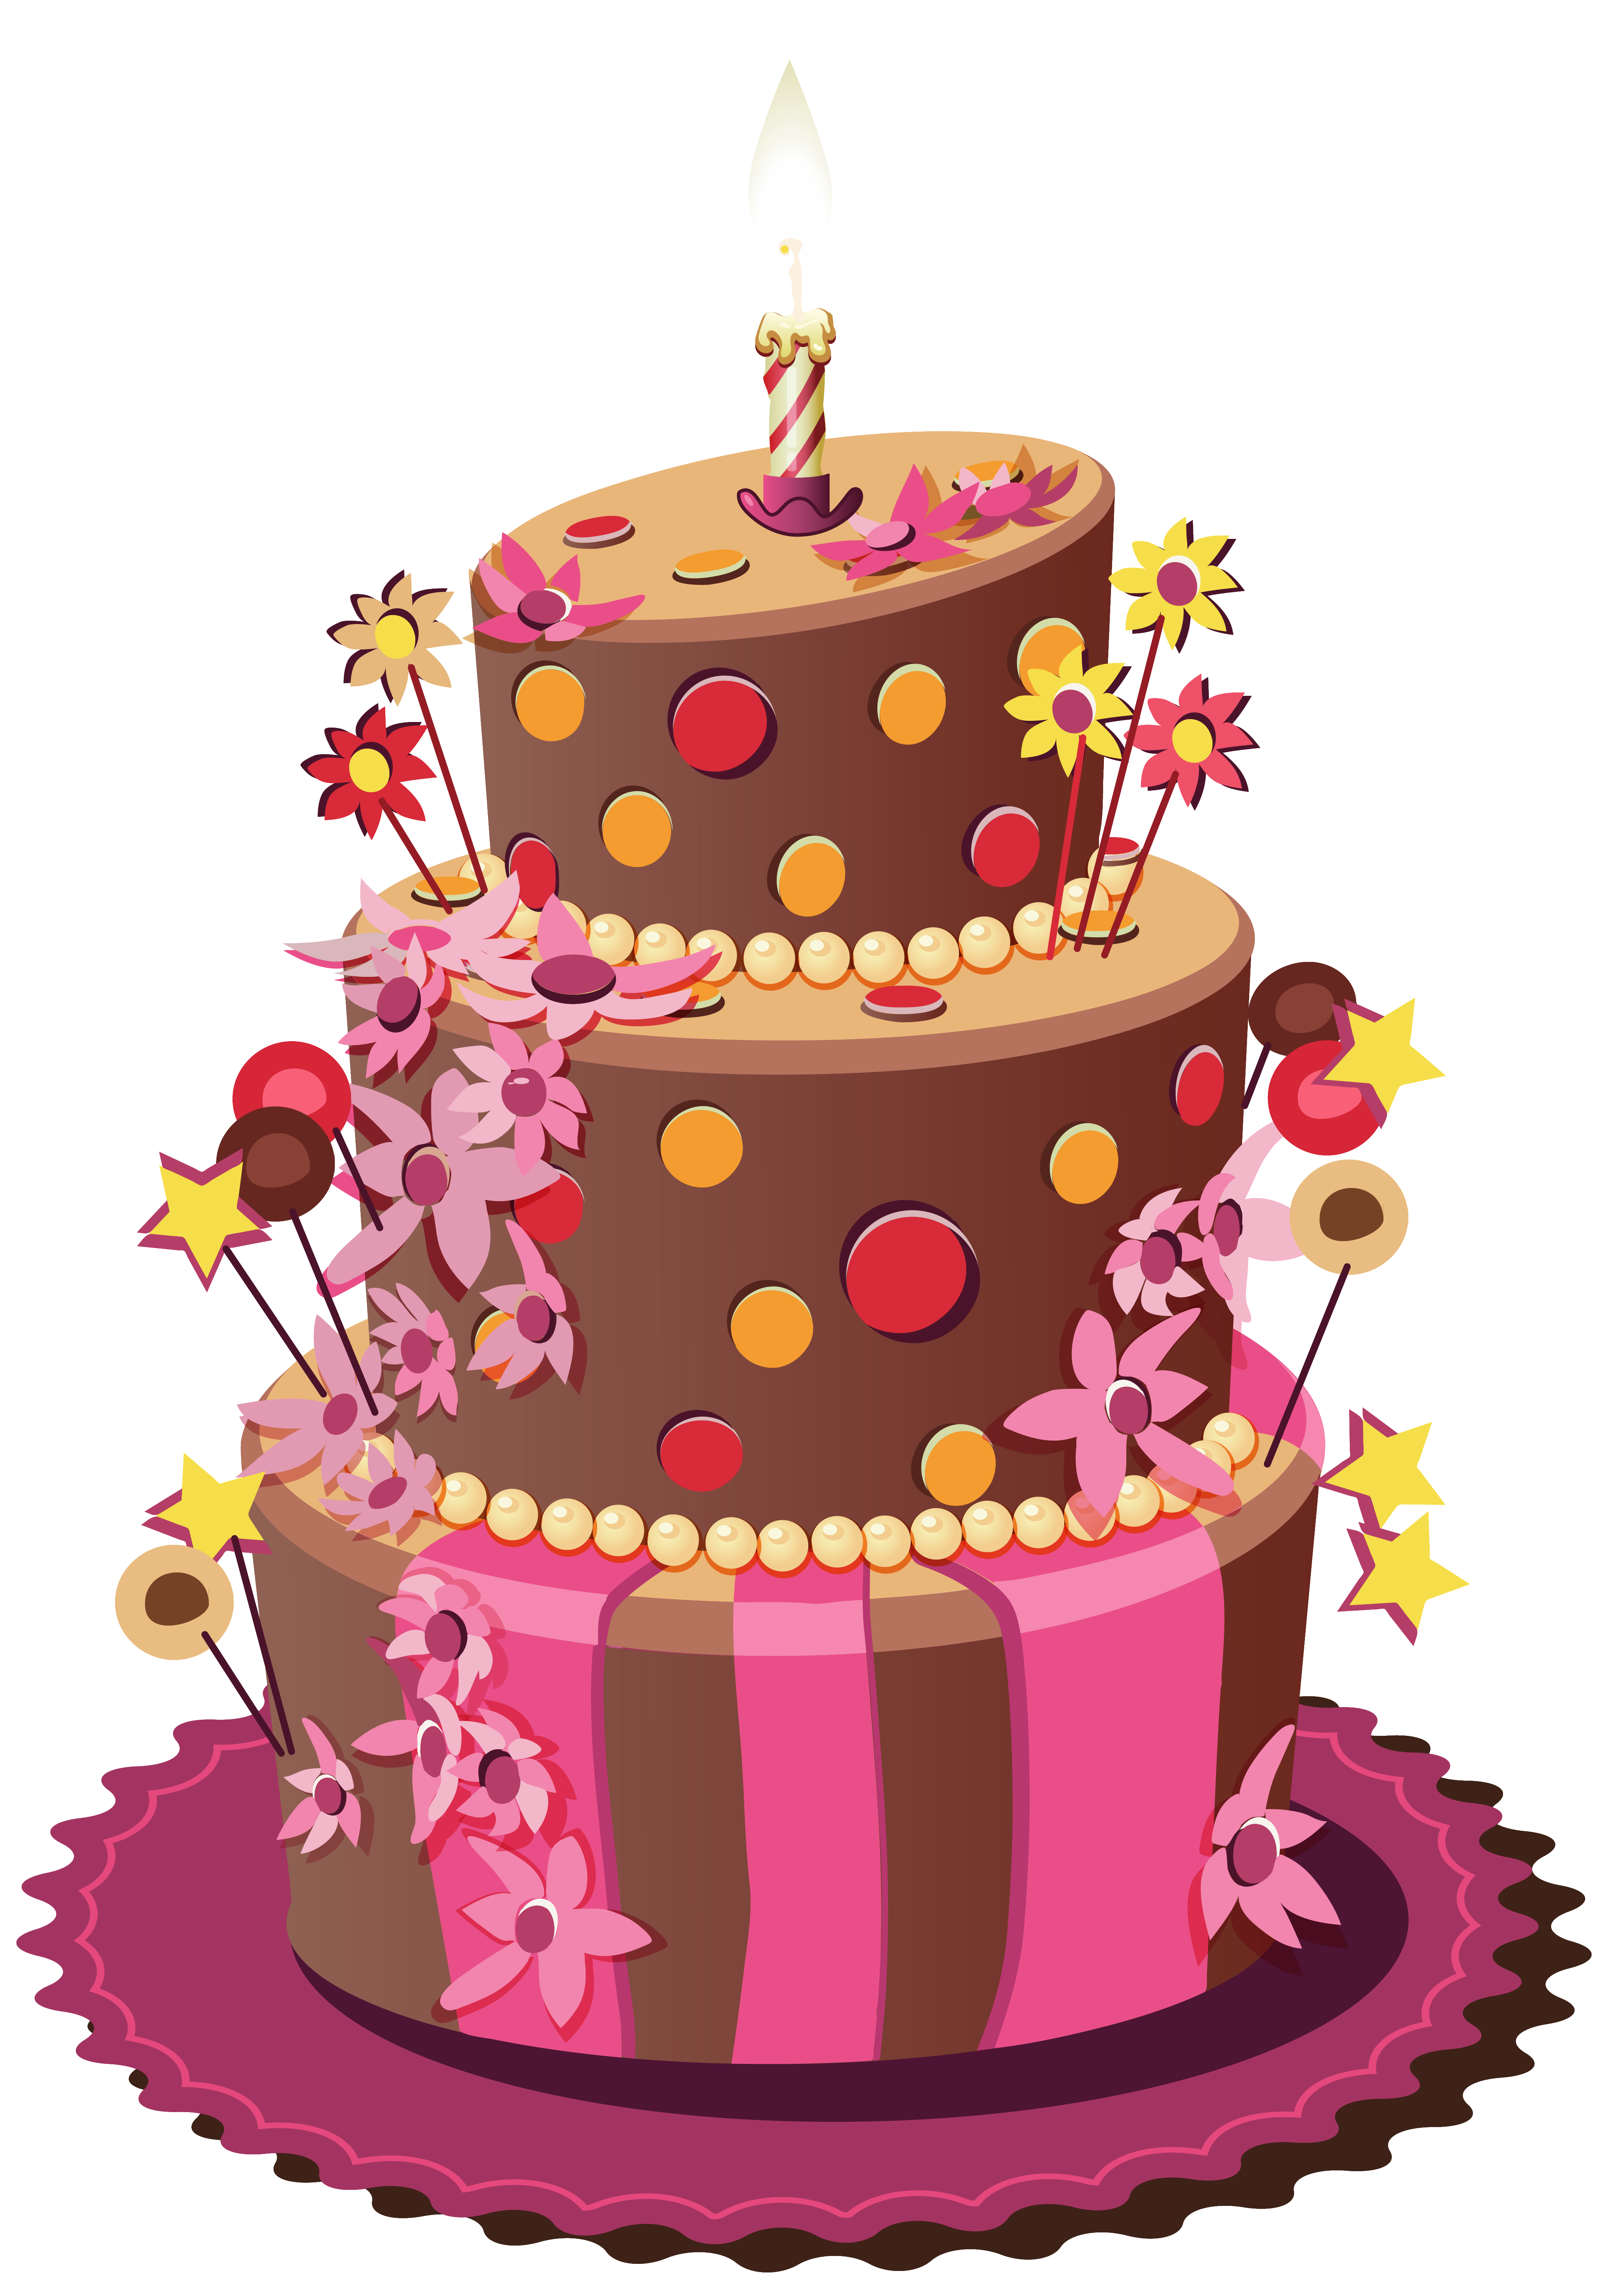 Cake PNG, Cake Transparent Background - FreeIconsPNG